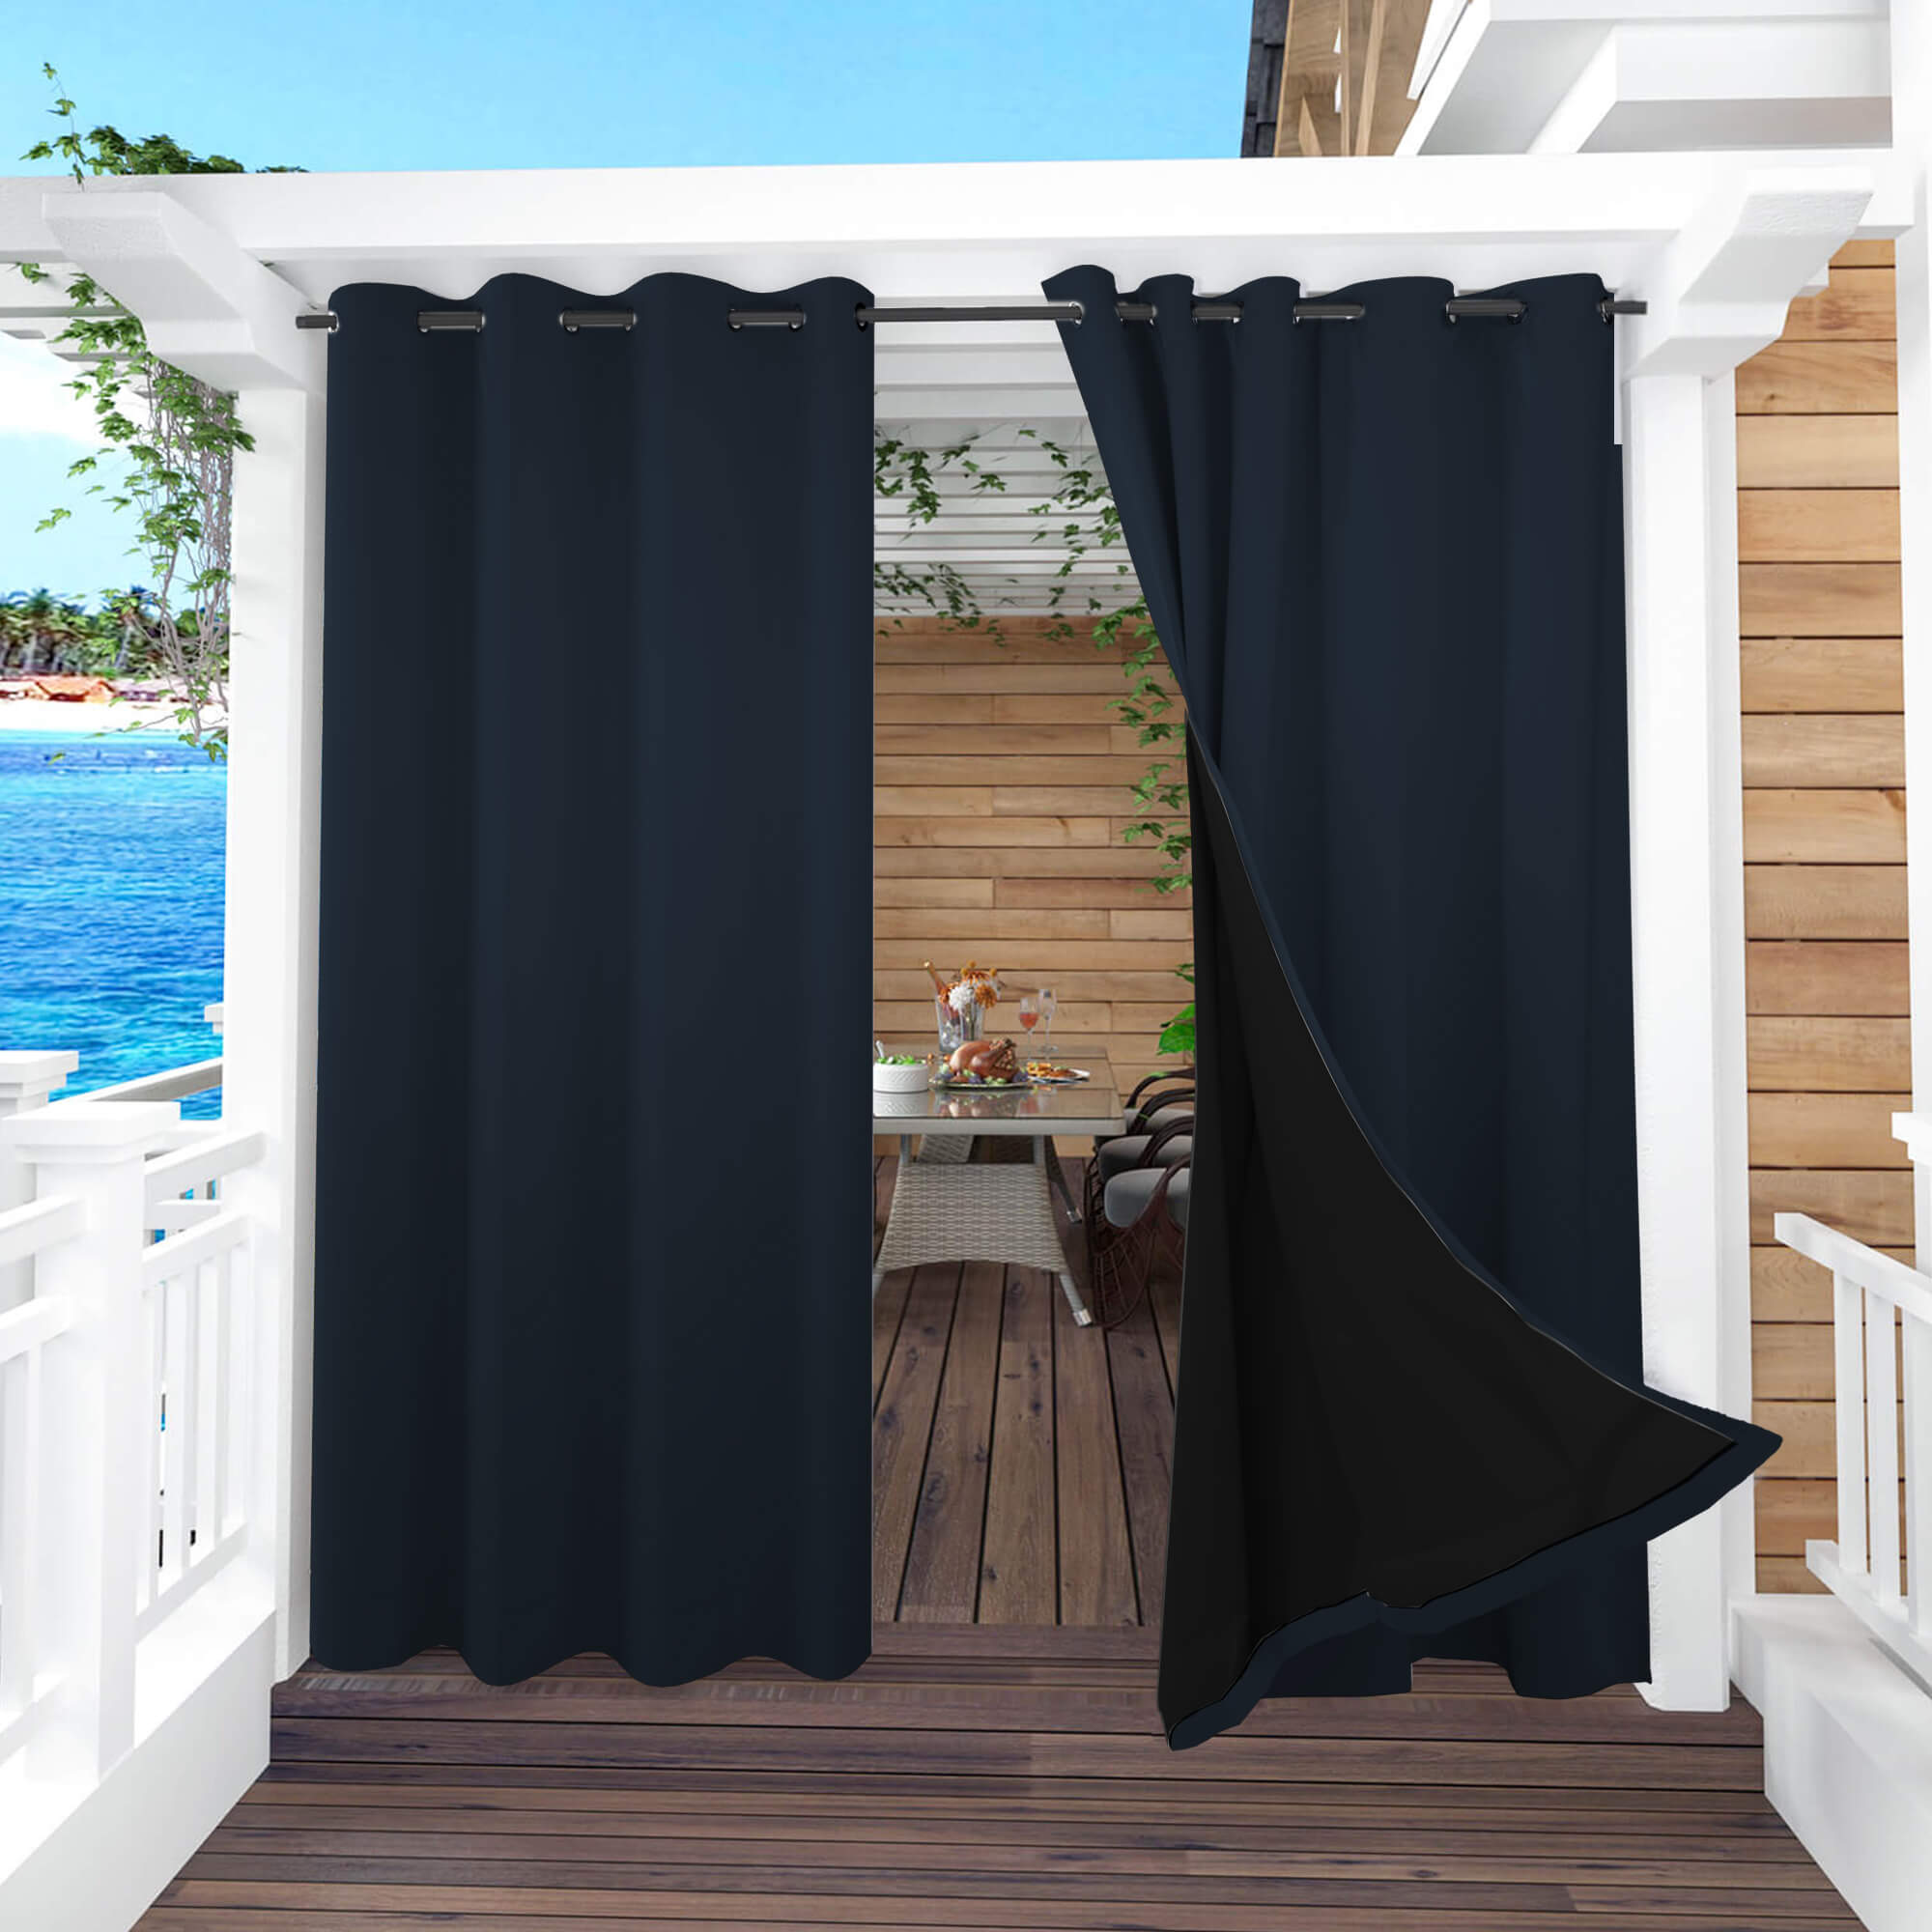 Snowcity Thermal Curtains/Drapes 1 Panel Navy Blue | Waterproof Curtains Grommet/Tab Top | Custom Blackout Curtains